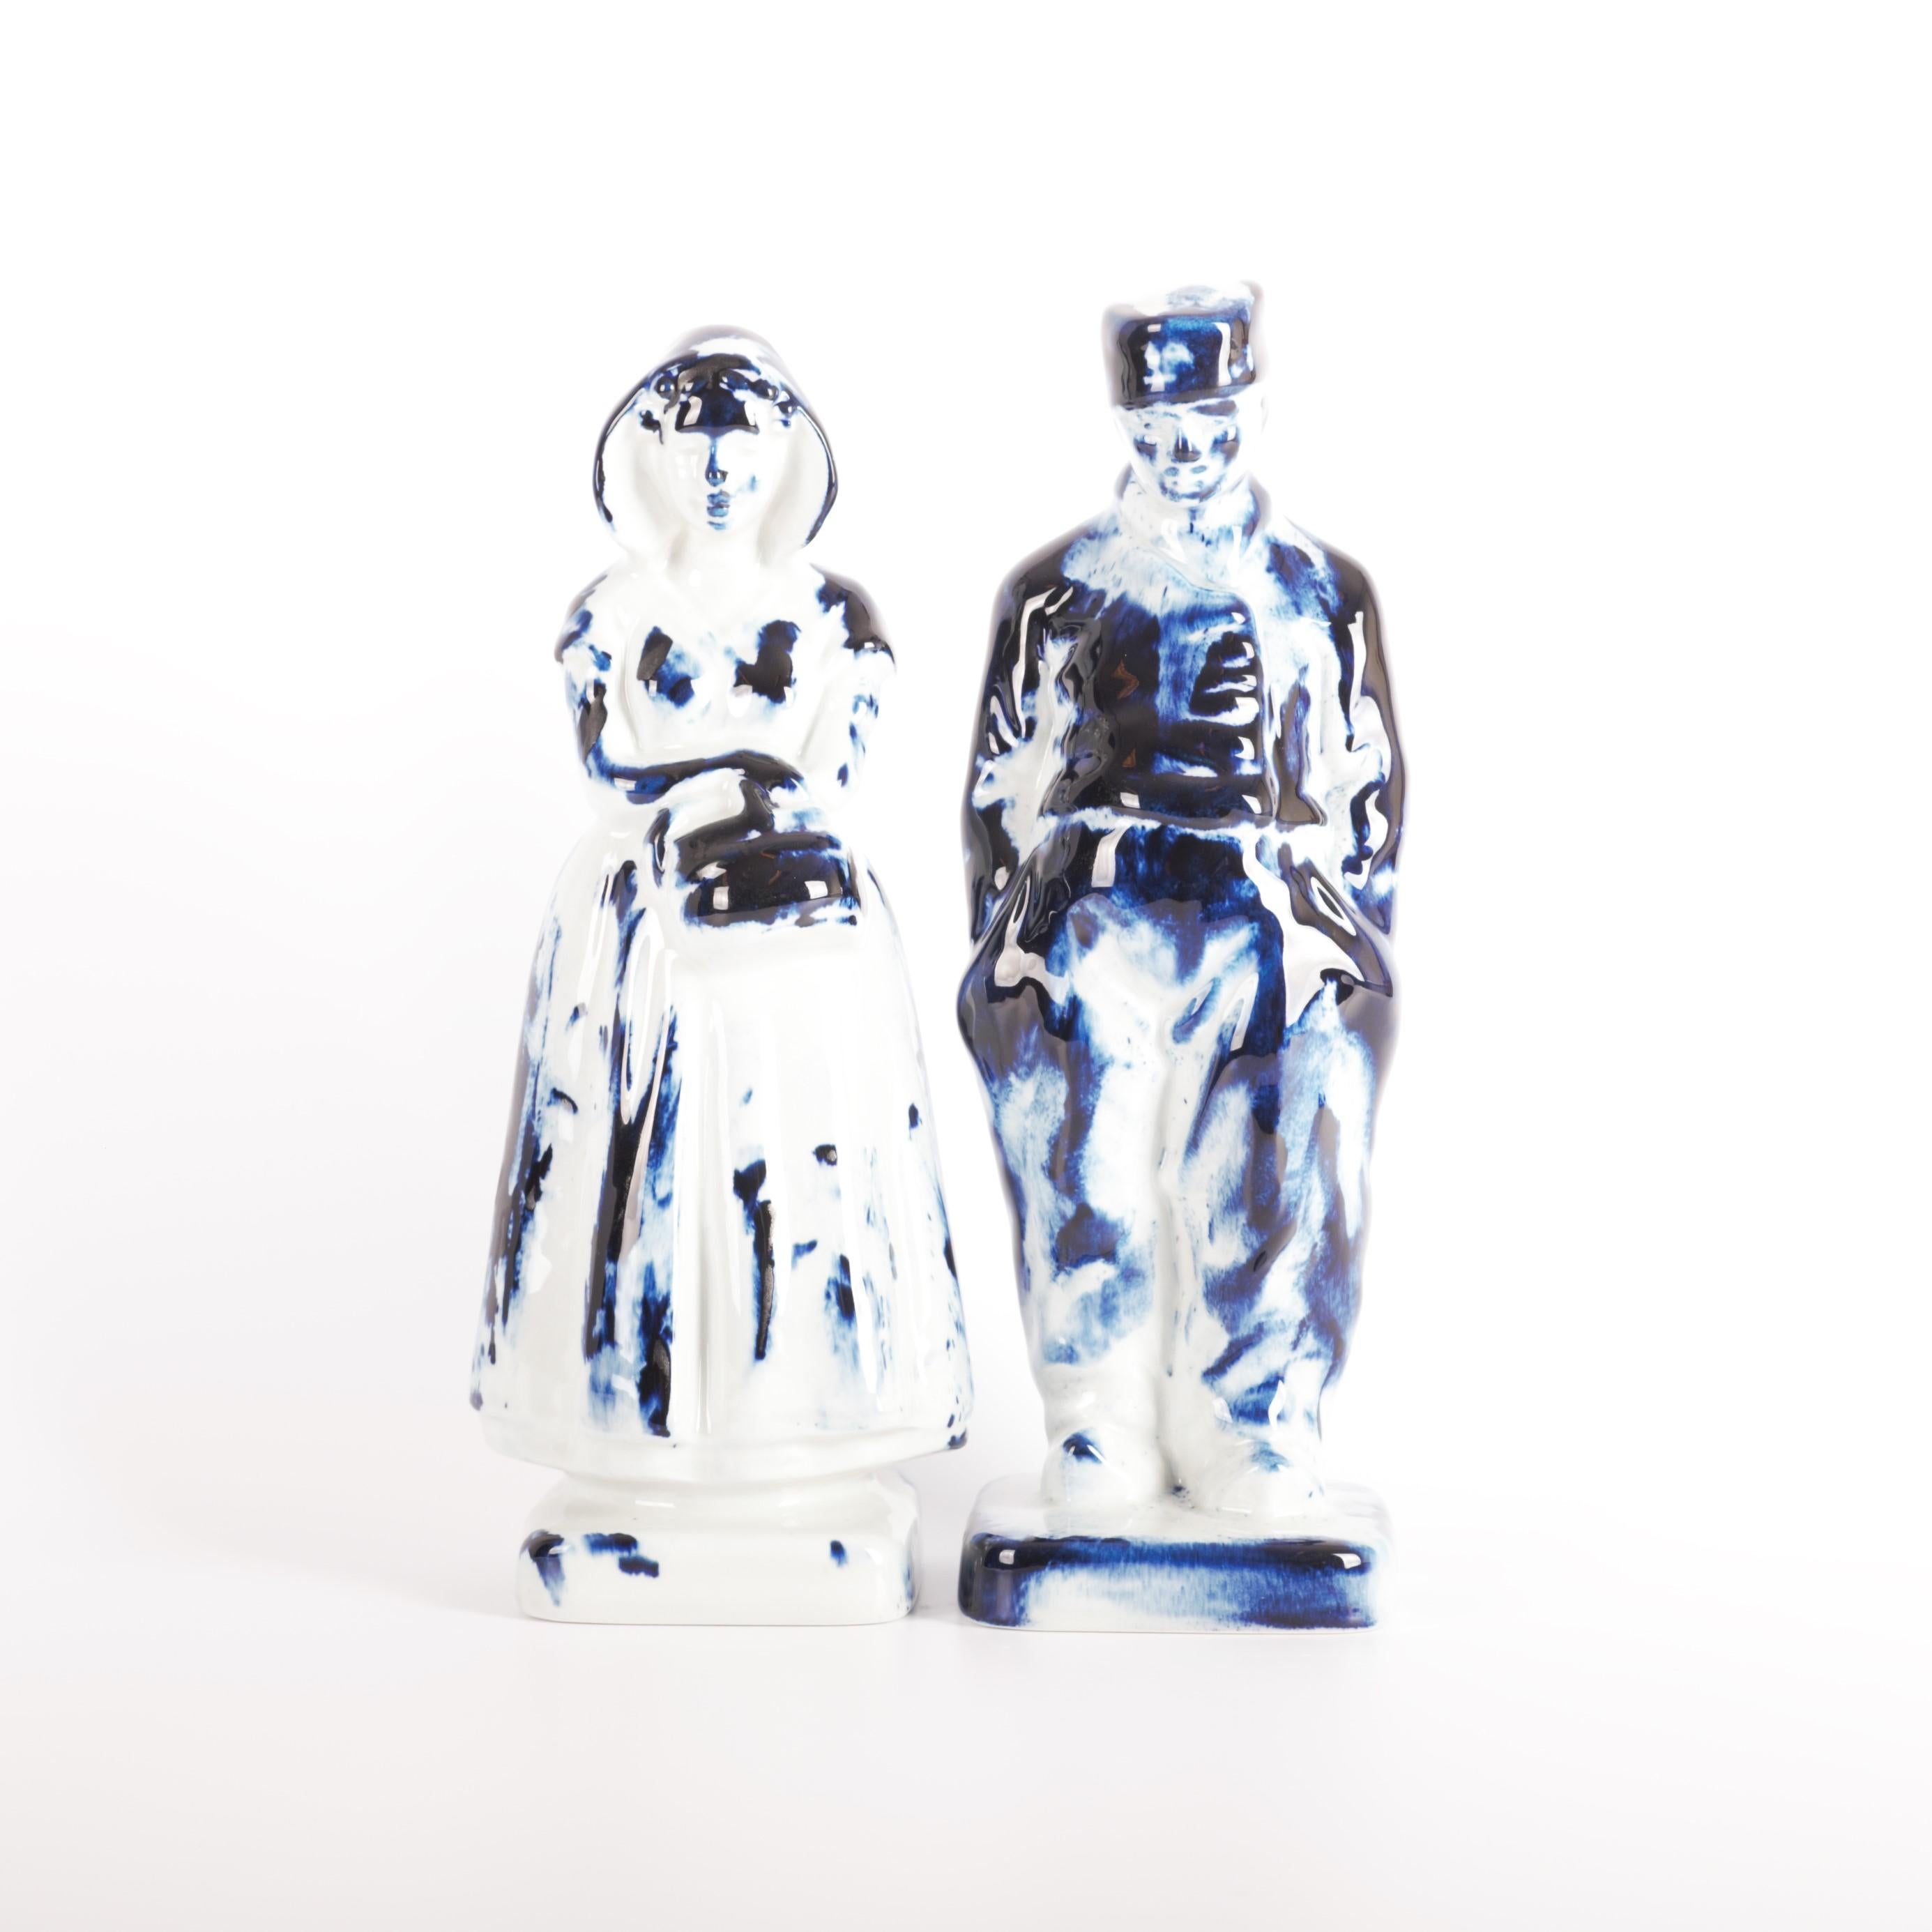 Dutch Delft Blue Farmer & Farmer Wife #3, by Marcel Wanders, Hand Painted, 2006 Unique For Sale